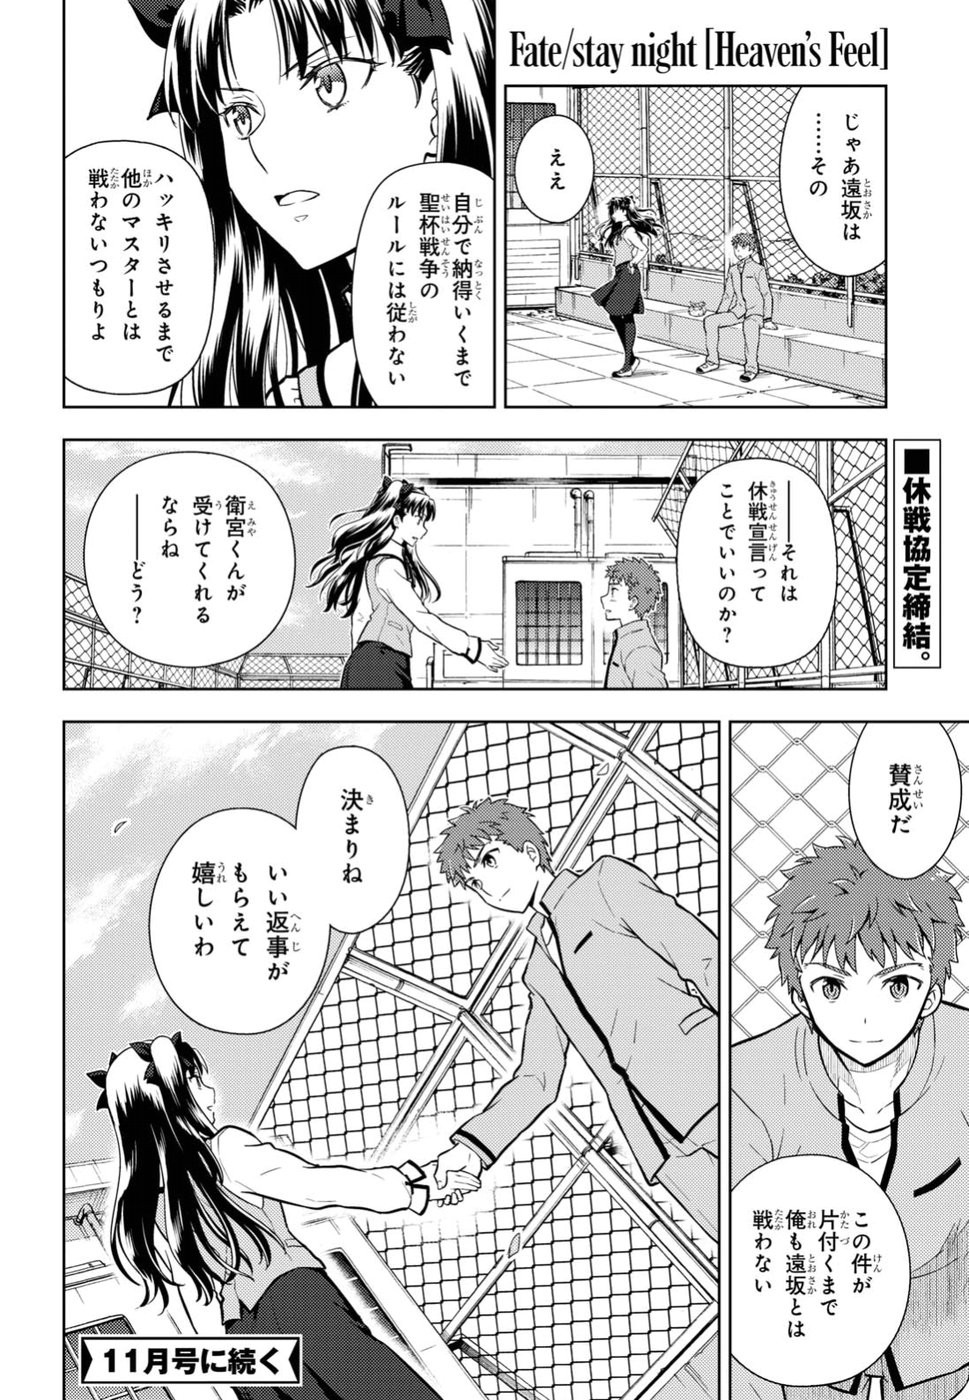 Fate/Stay night Heaven's Feel - Chapter 41 - Page 36